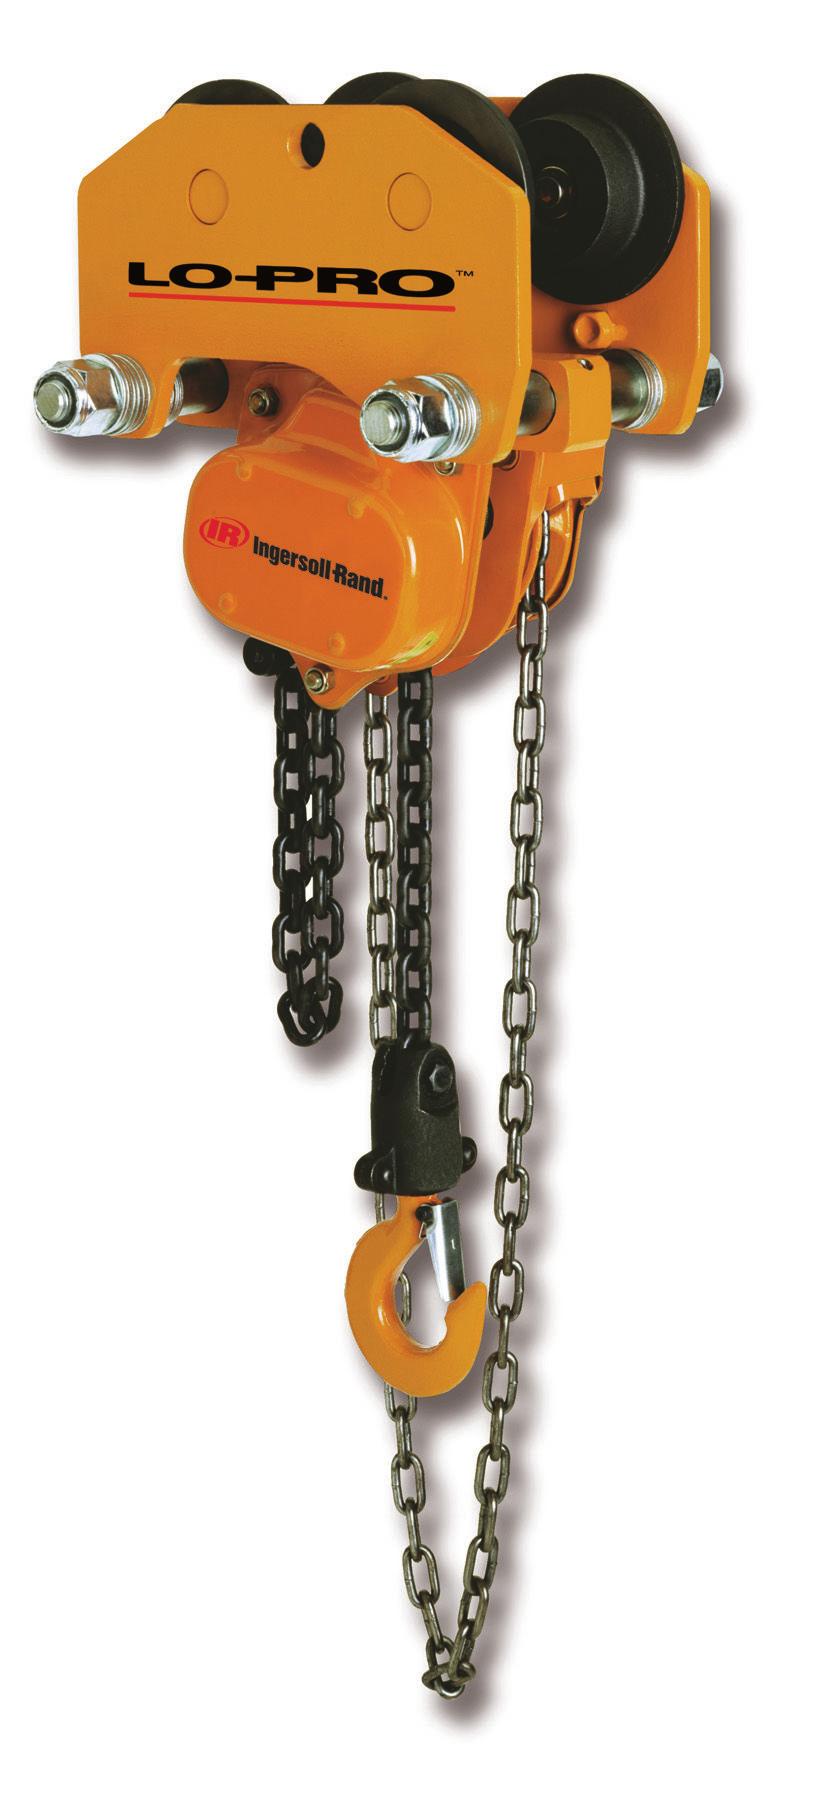 THV Lo-Pro Series Manual hain Hoist 1/2 10 metric ton Lifting apacity eatures: Low headroom rmy Style type trolley hoist Utilizes our premium VL2 hoist with a low profile trolley.